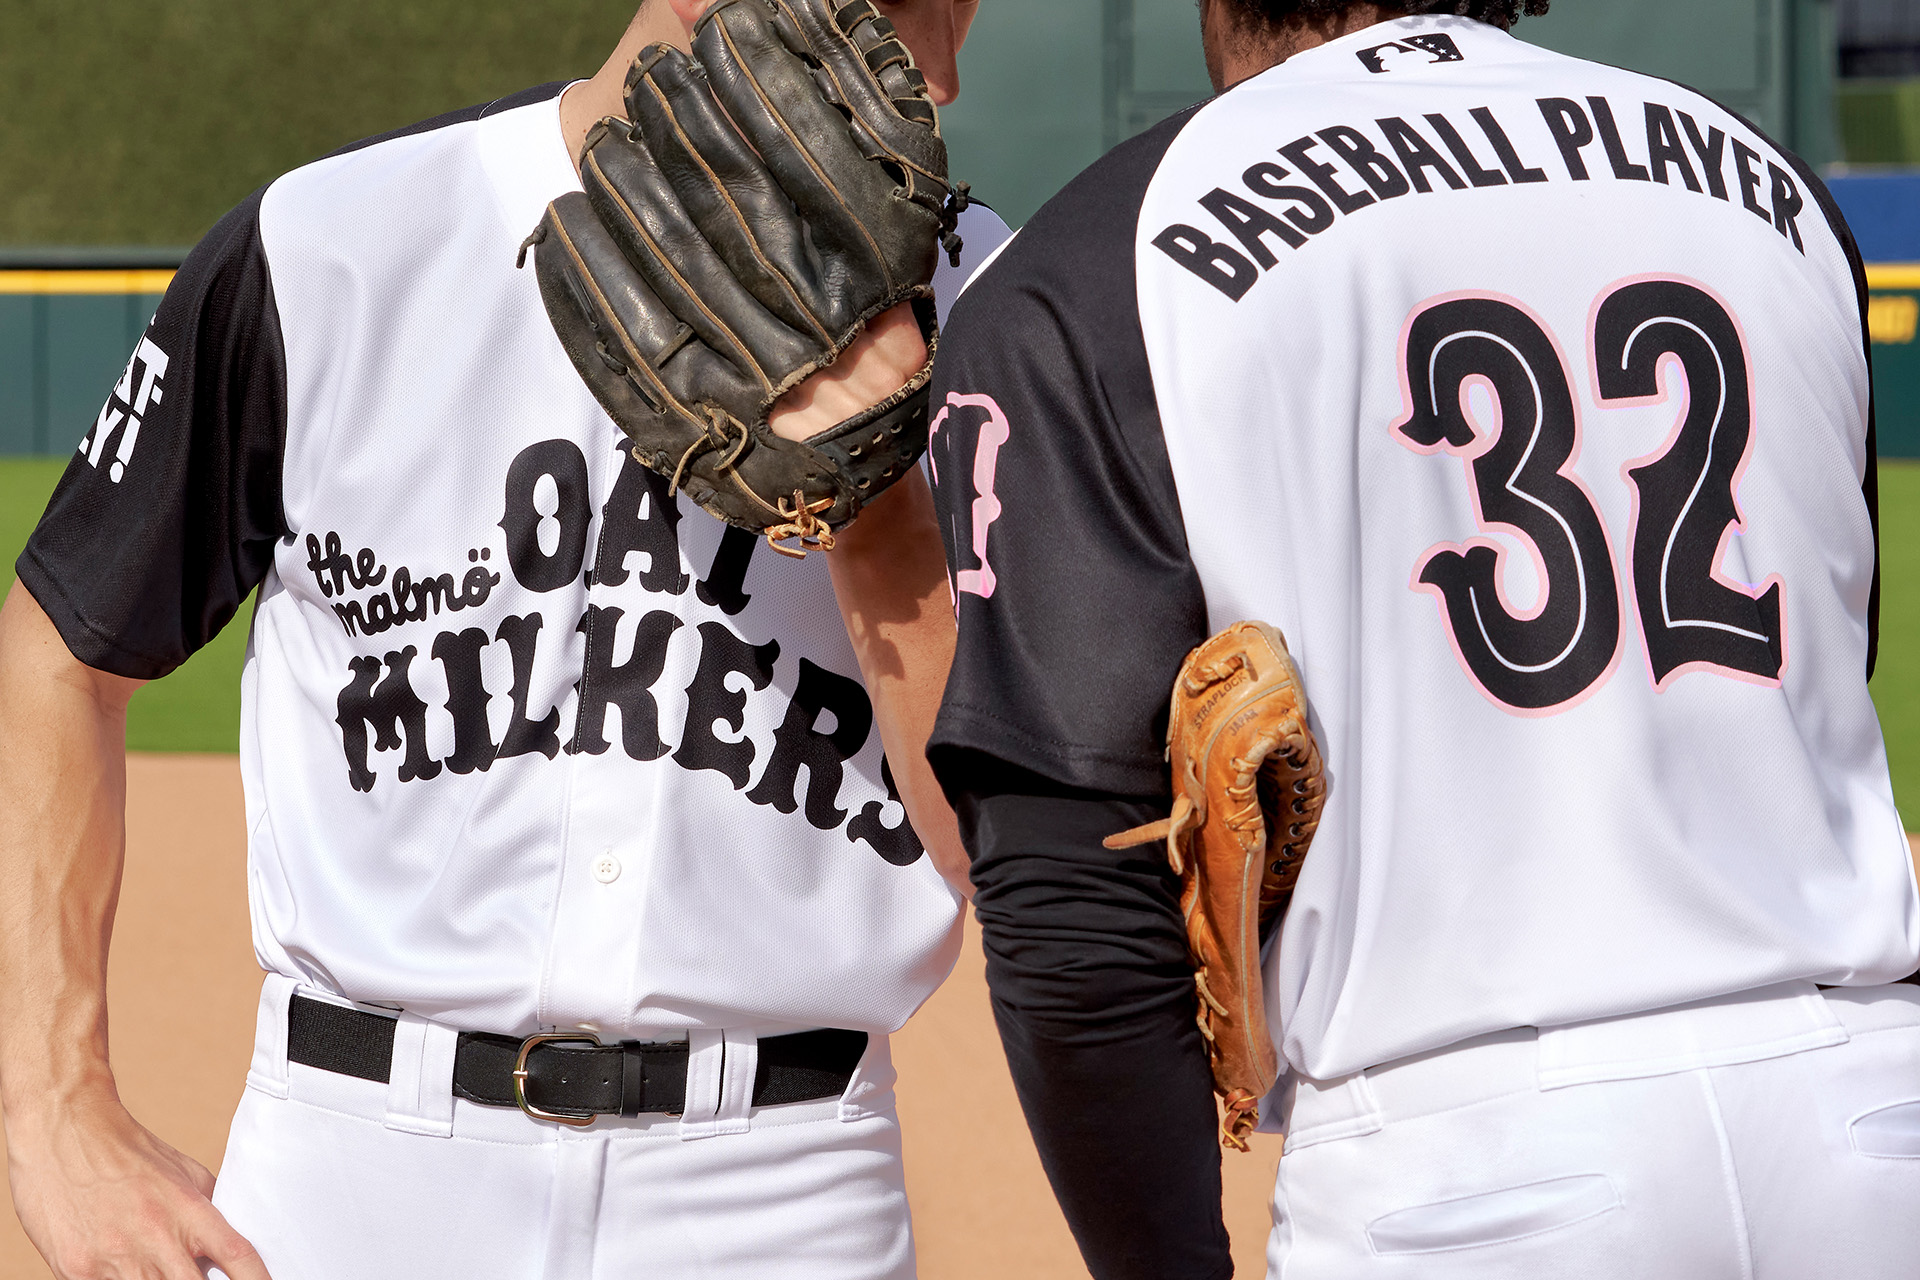 Oatly to Form MiLB’s 121st Team, The Malmö Oat Milkers